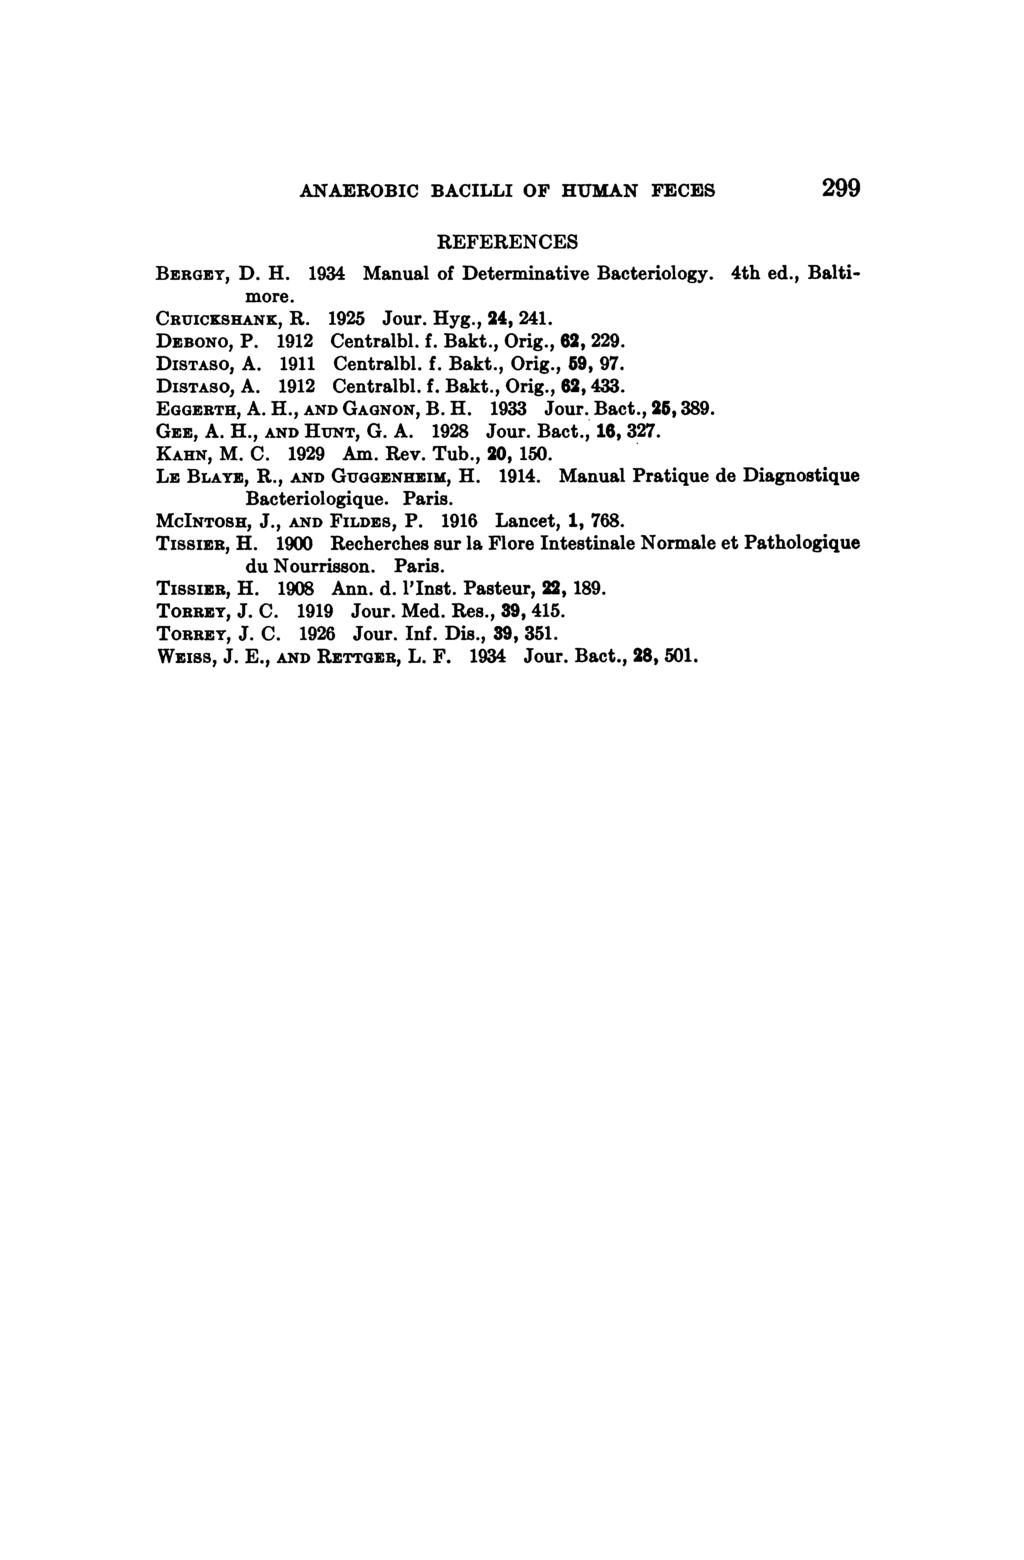 ANAEROBIC BACILLI OF HUMAN FECES 299 REFERENCES BERGEY, D. H. 1934 Manual of Determinative Bacteriology. 4th ed., Baltimore. CRUICKSHANK, R. 1925 Jour. Hyg., 24, 241. DEBONO, P. 1912 Centralbl. f.